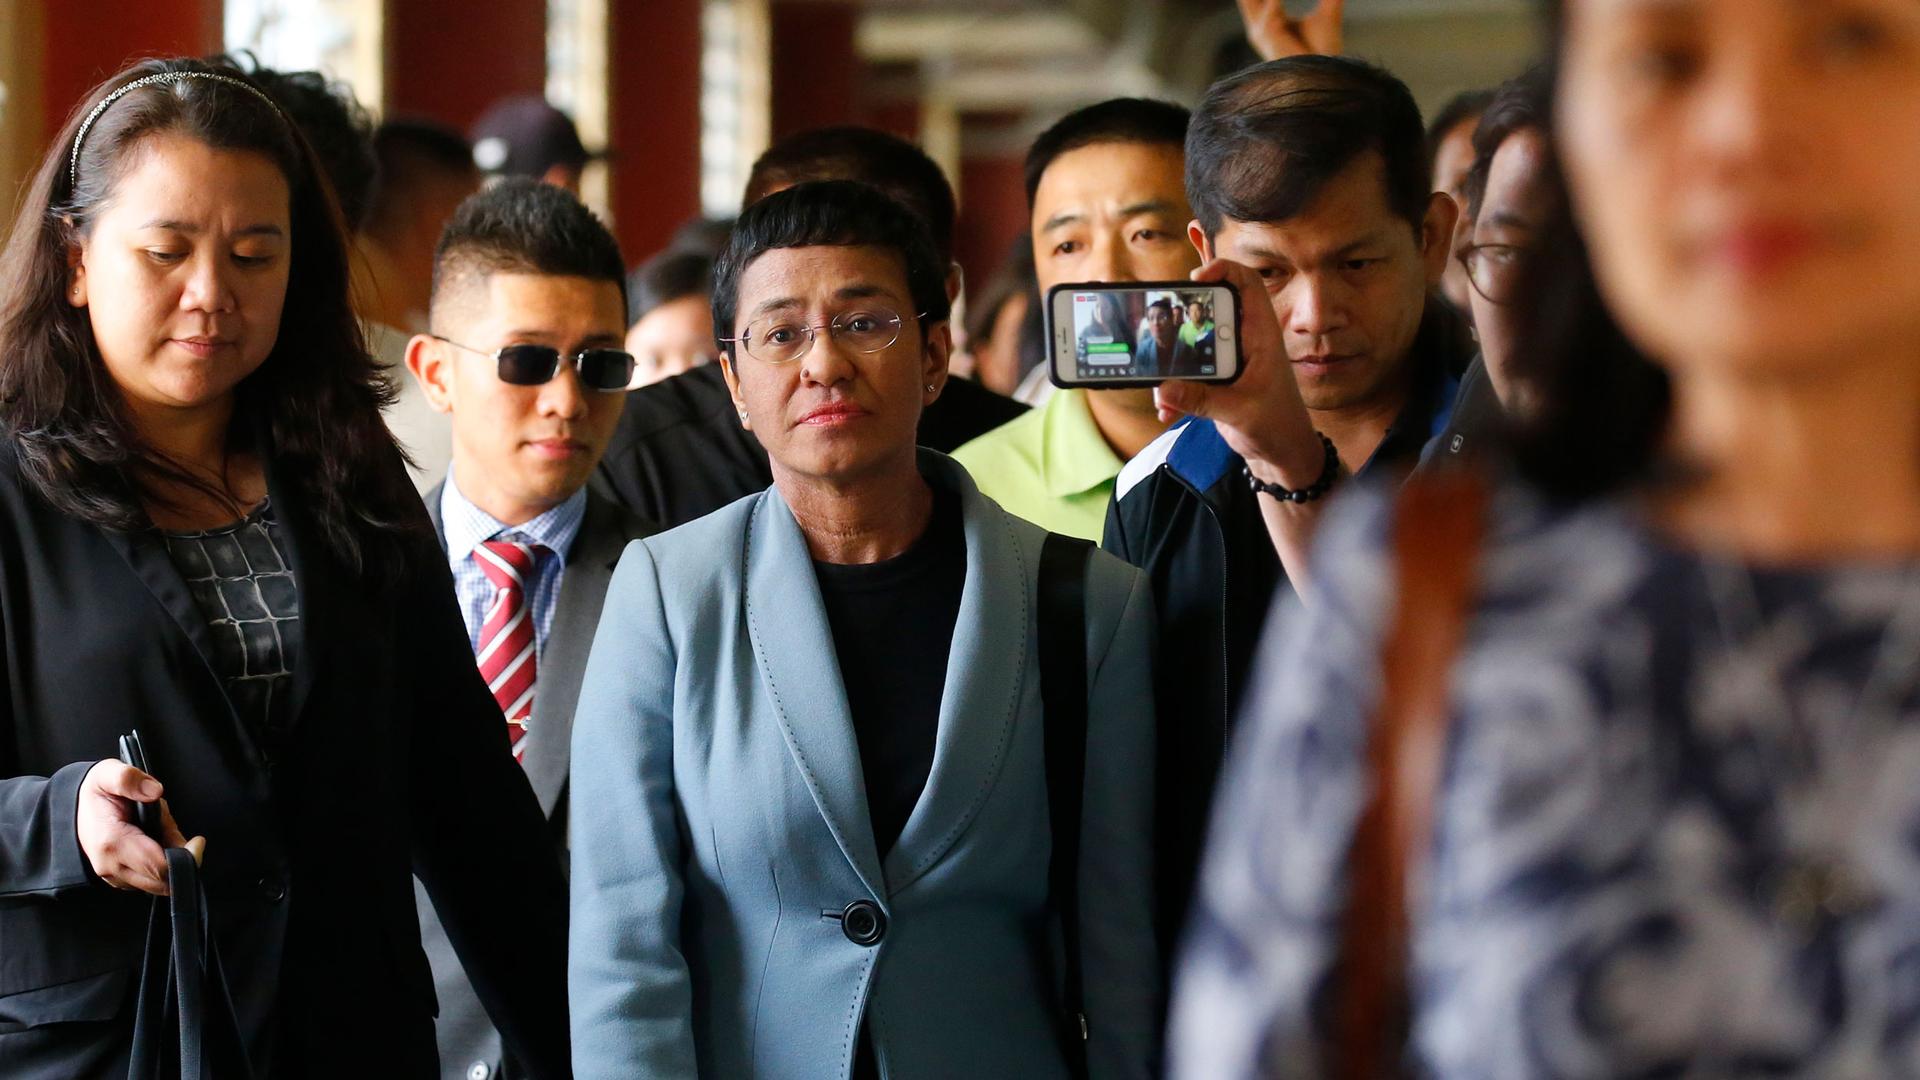 Maria Ressa, center, the award-winning head of a Philippine online news site Rappler, is escorted into the court room to post bail at a Regional Trial Court following an overnight arrest by National Bureau of Investigation agents on a libel case Thursday,